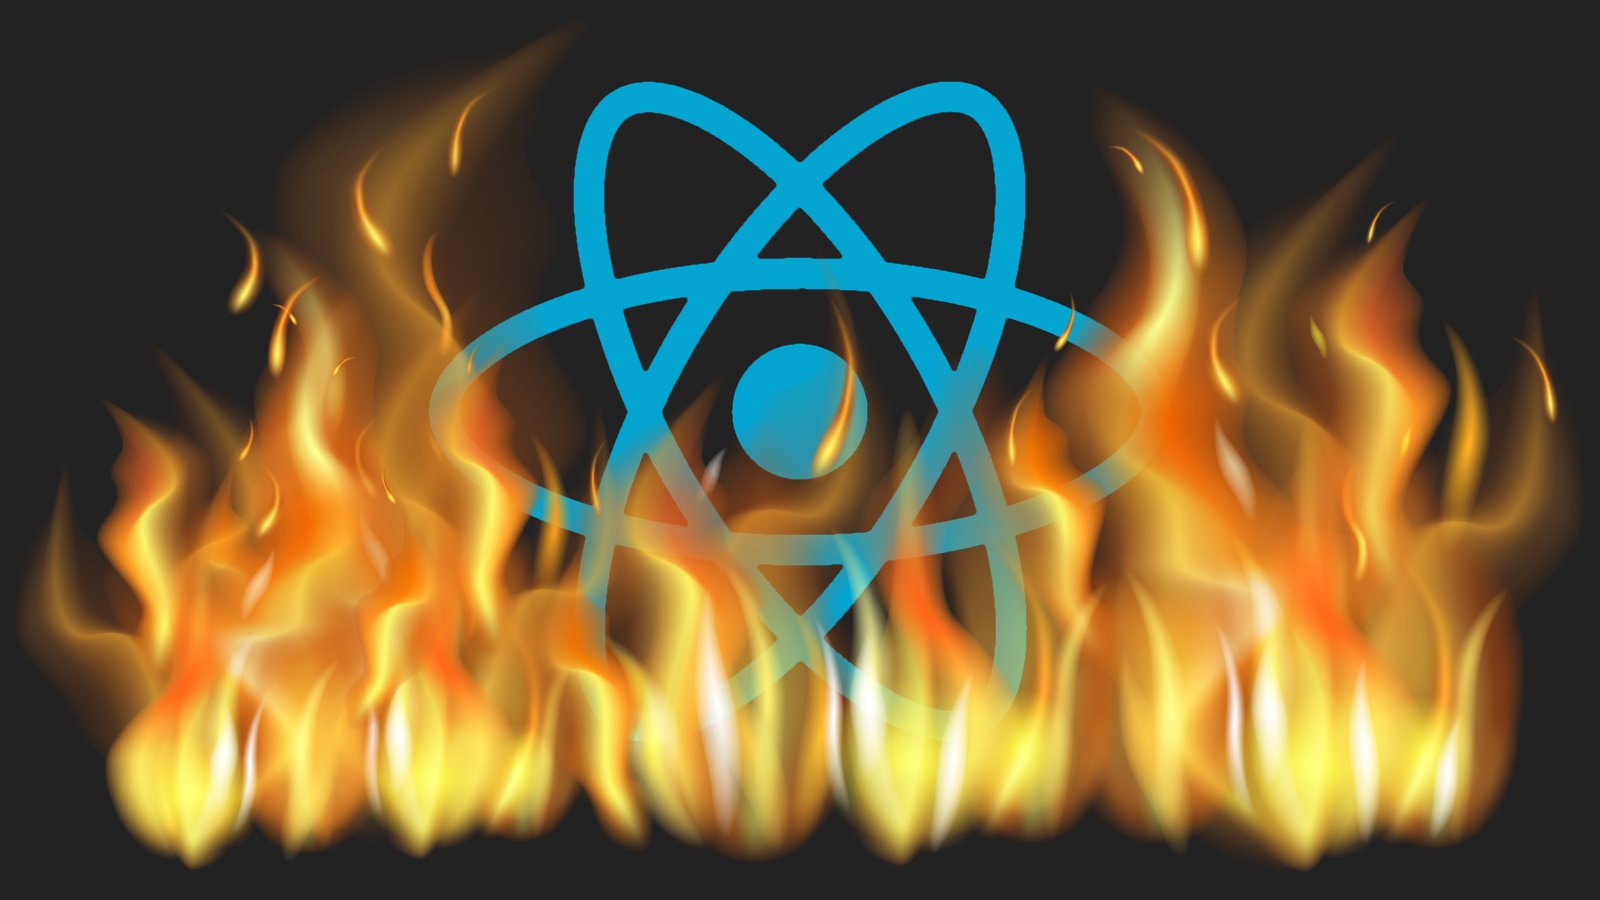 Fire up your marketplace front-end performance with React